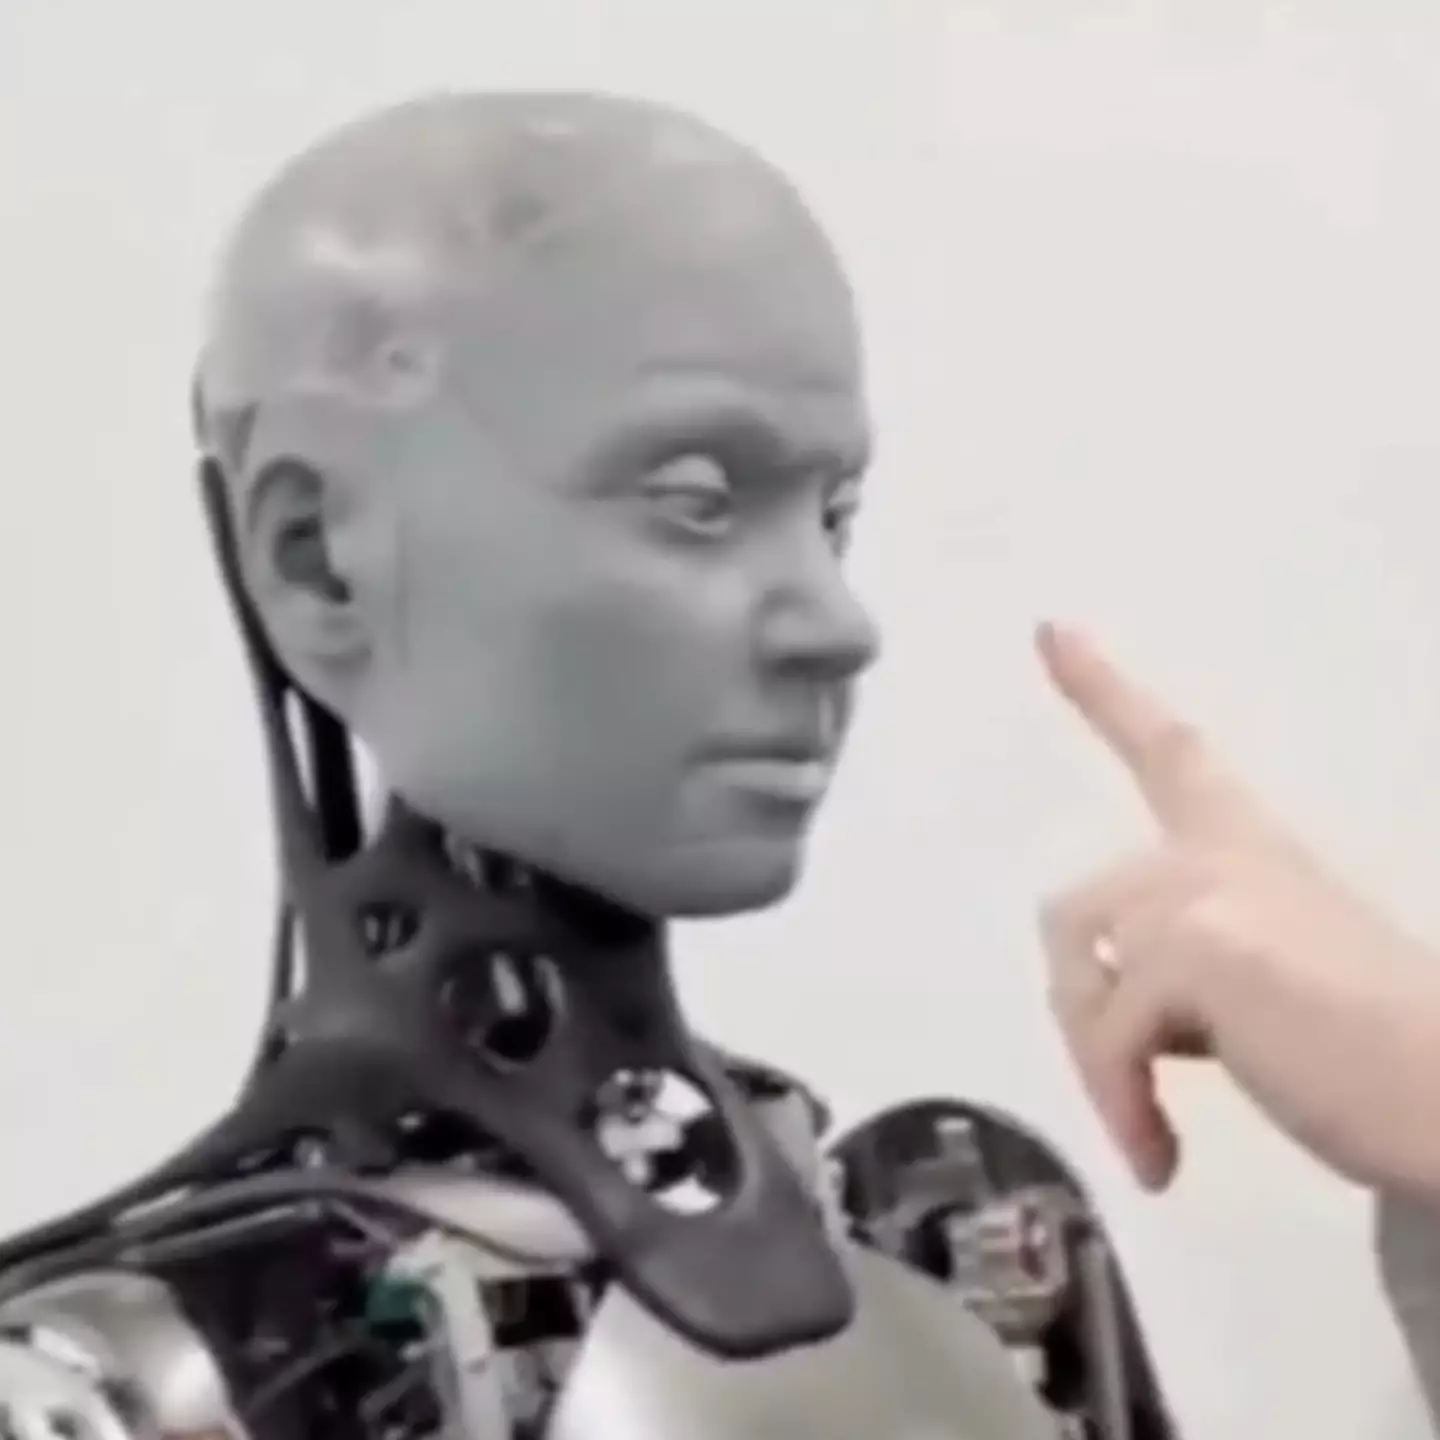 Humanoid robot has super creepy reaction to its nose being touched